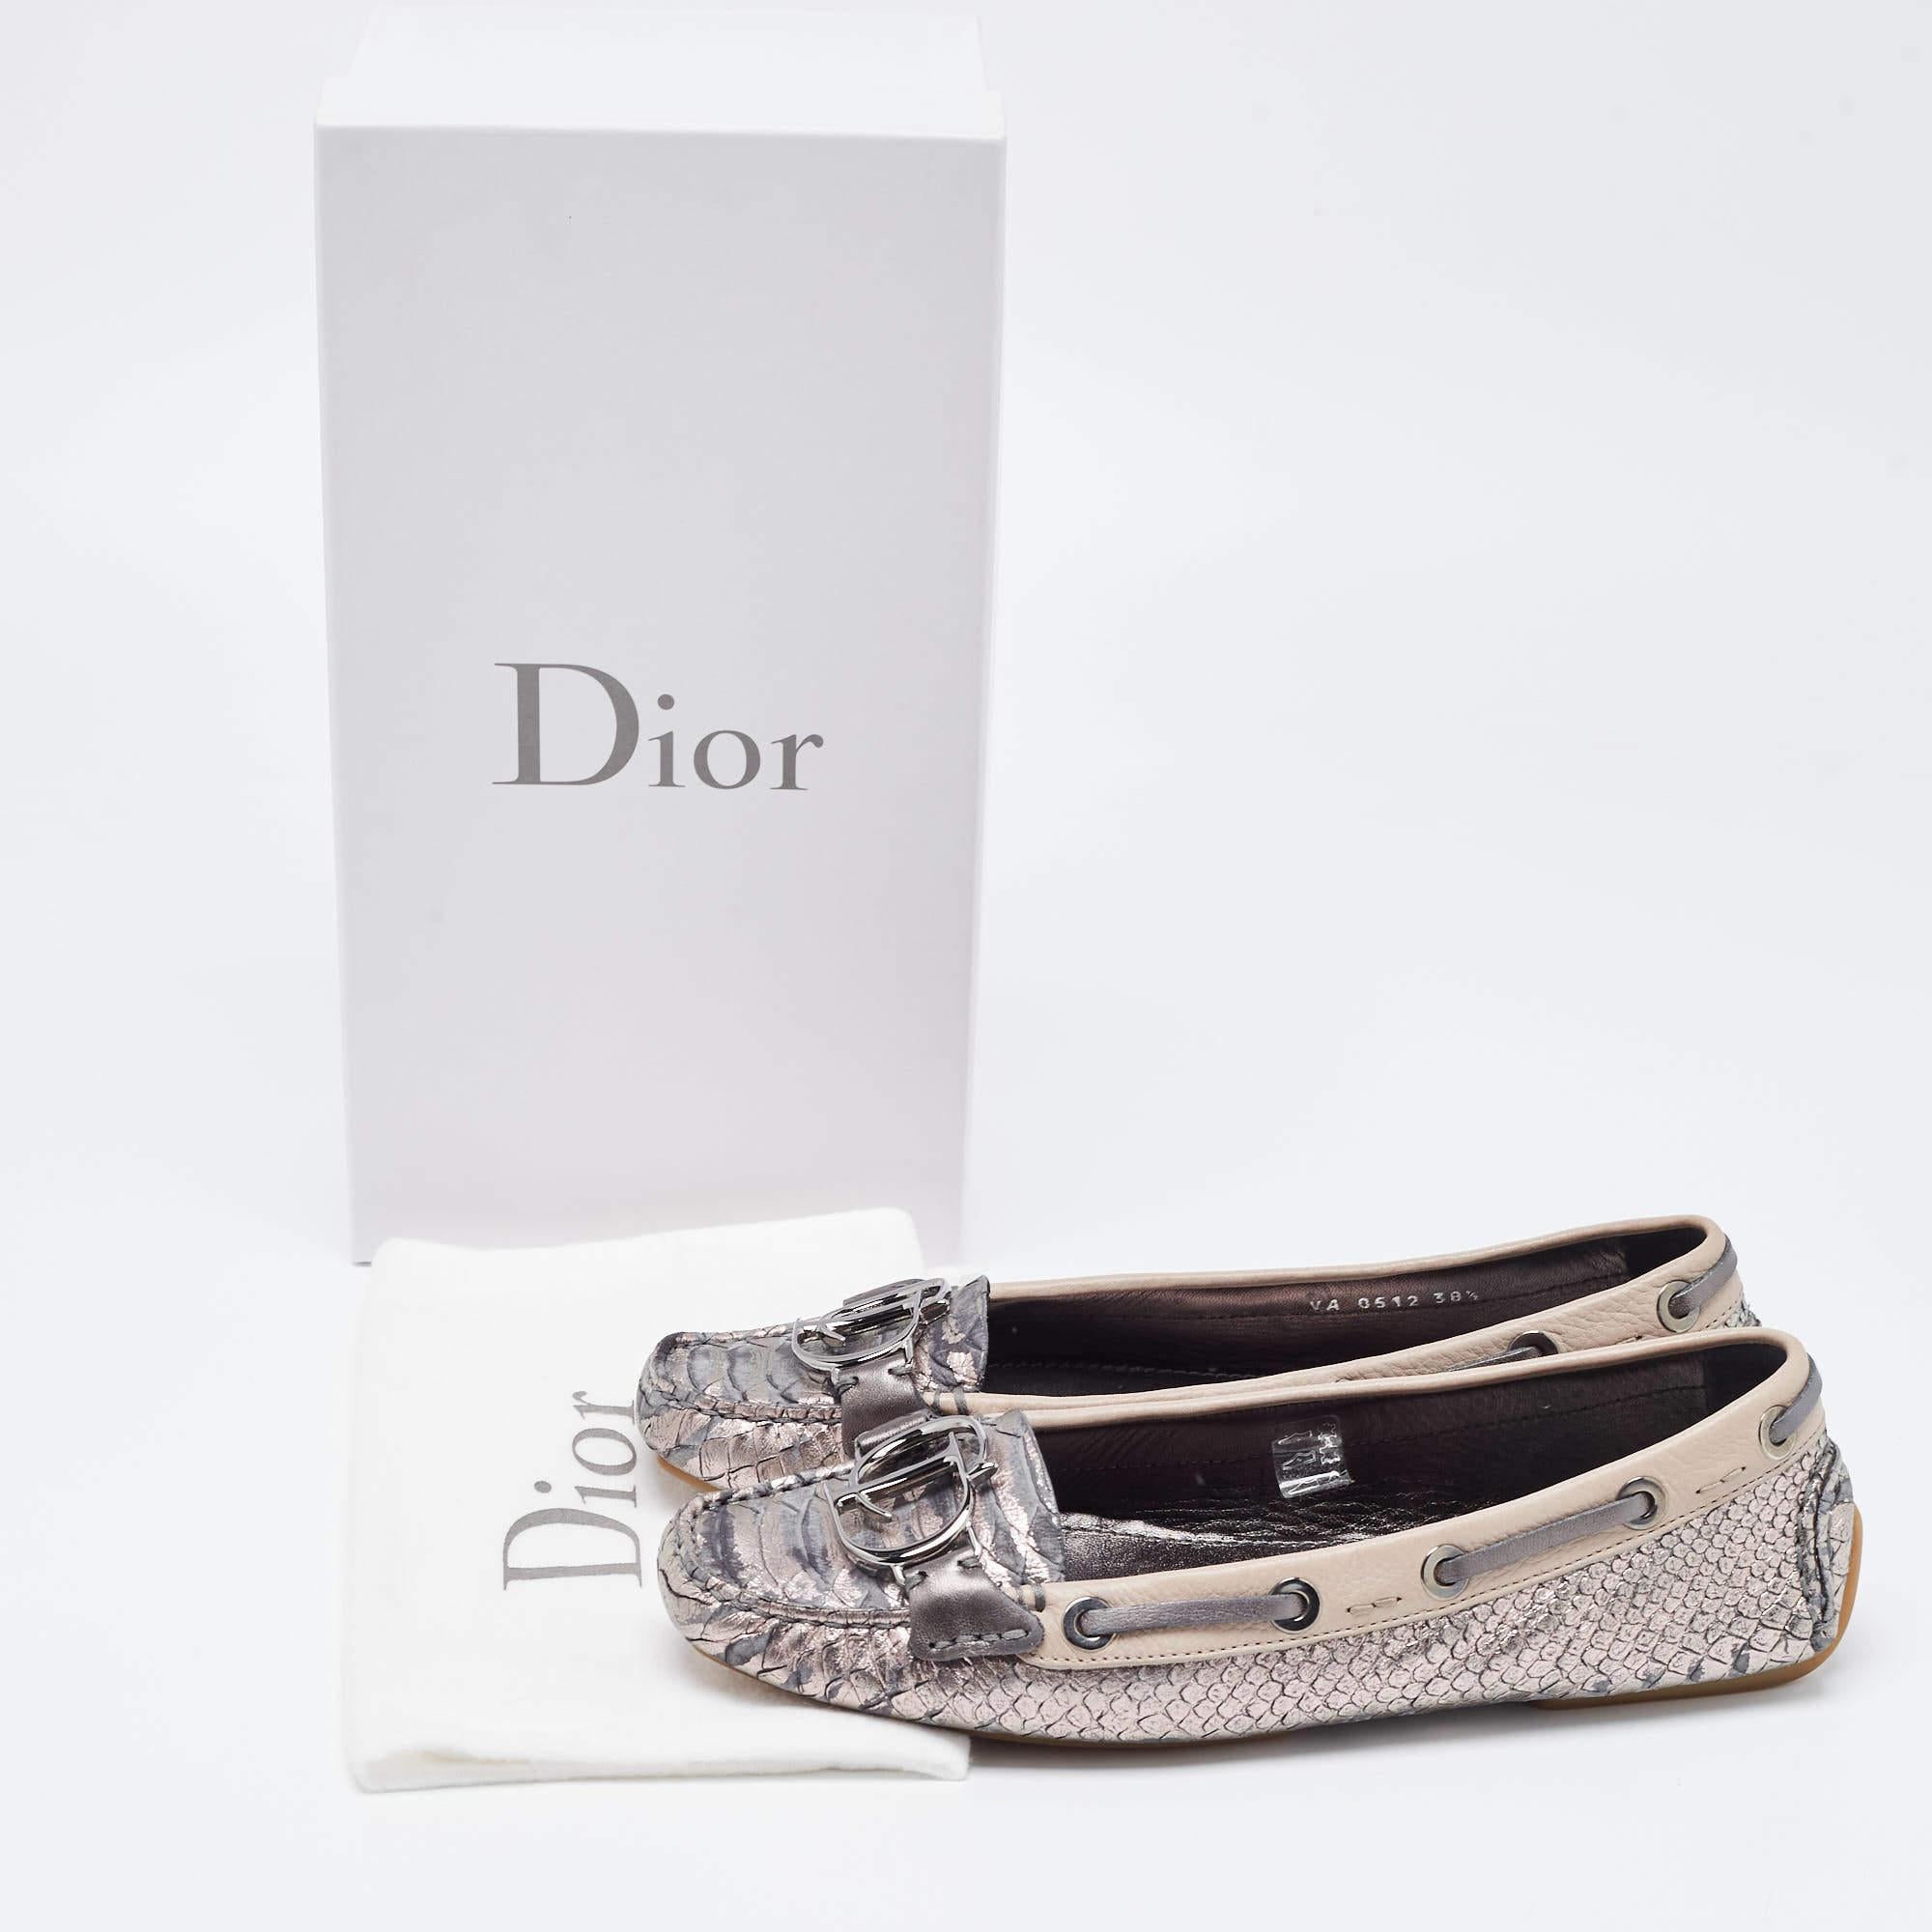 Dior Metallic Grey/Pink Python Embossed Leather CD Slip Loafers 38.5 3